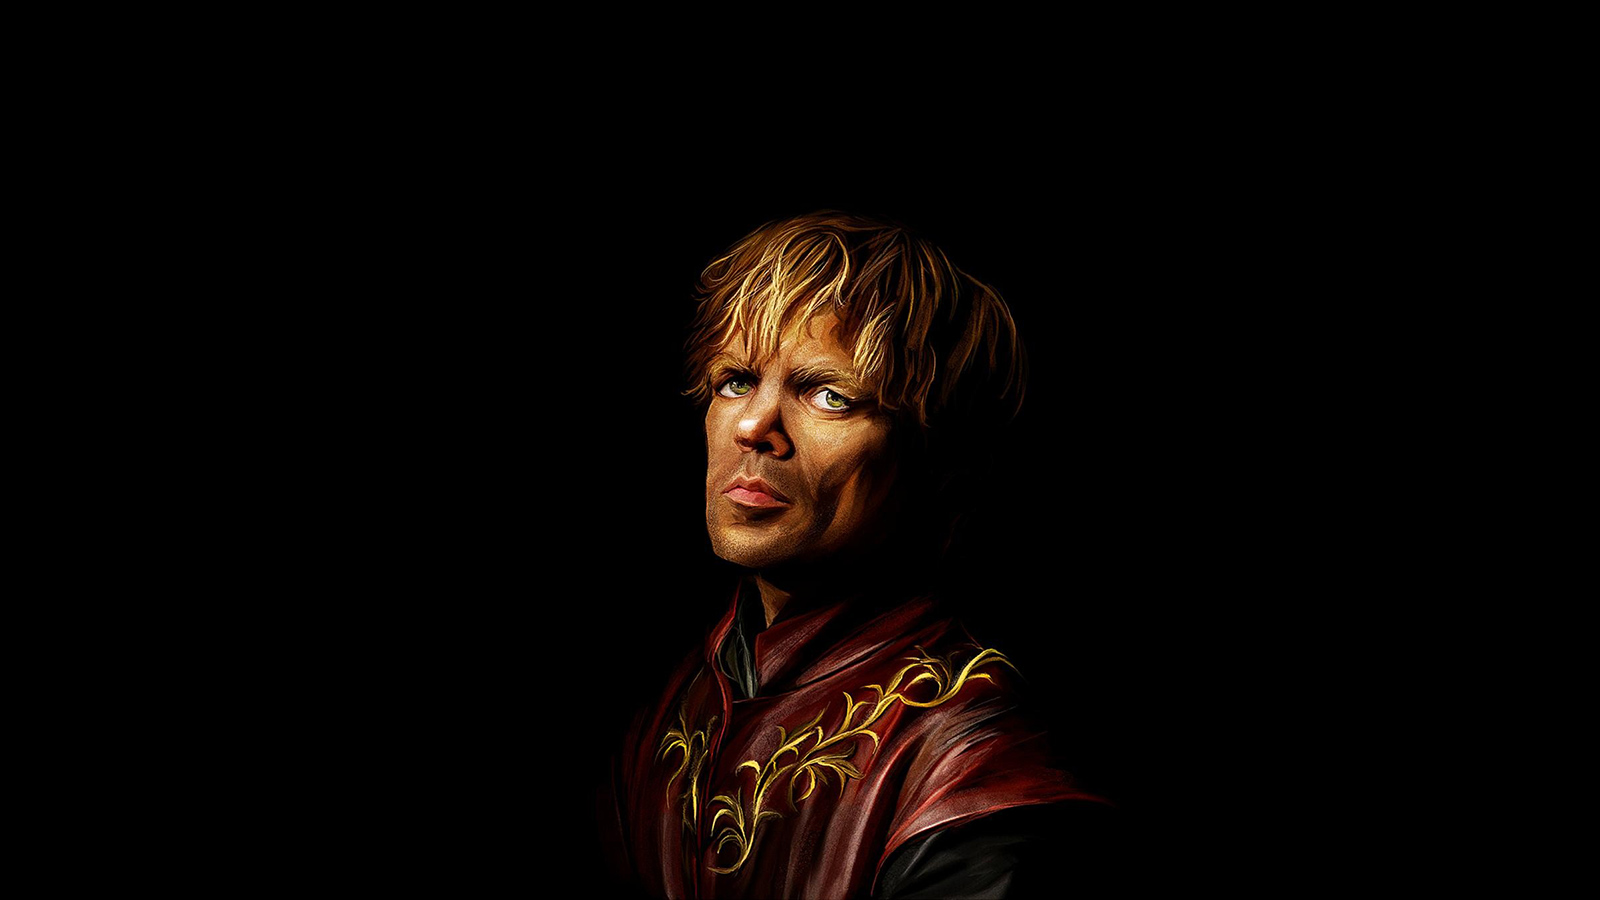 Game Of Thrones Tyrion Lannister The Imp Wallpaper For Android